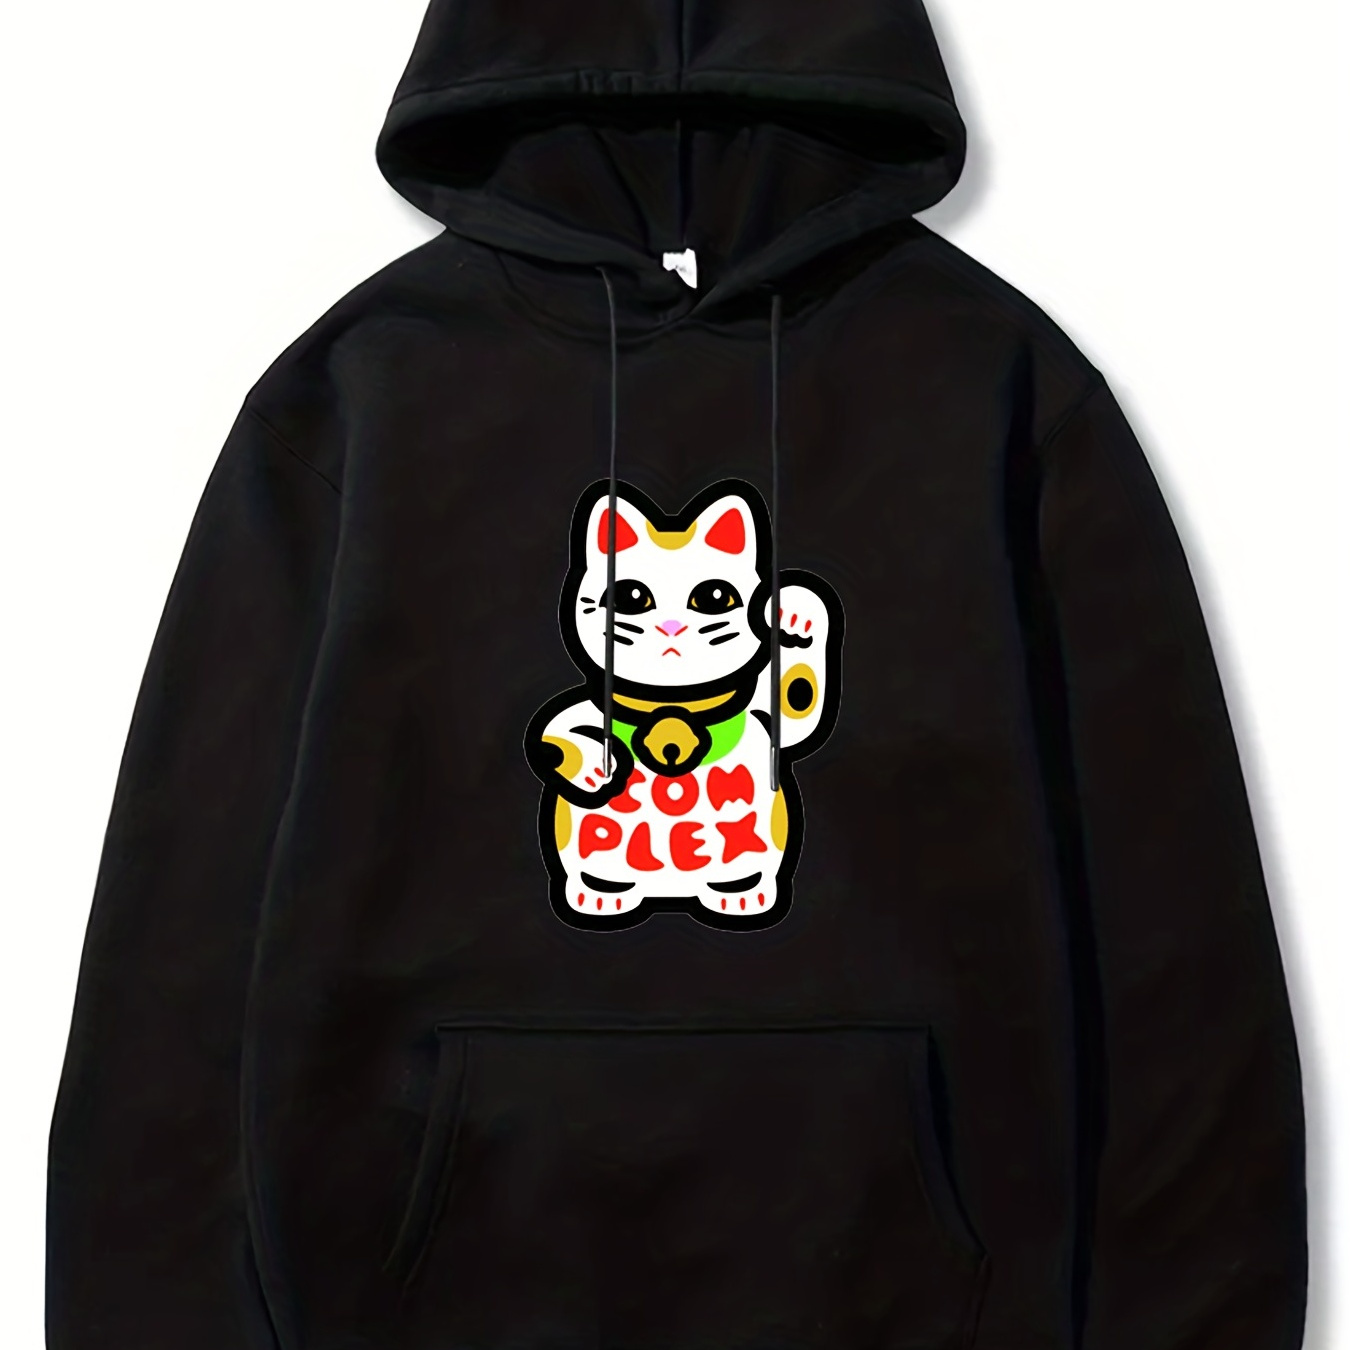 

Lucky Cat Print, Hoodies For Men, Graphic Sweatshirt With Kangaroo Pocket, Comfy Trendy Hooded Pullover, Mens Clothing For Fall Winter